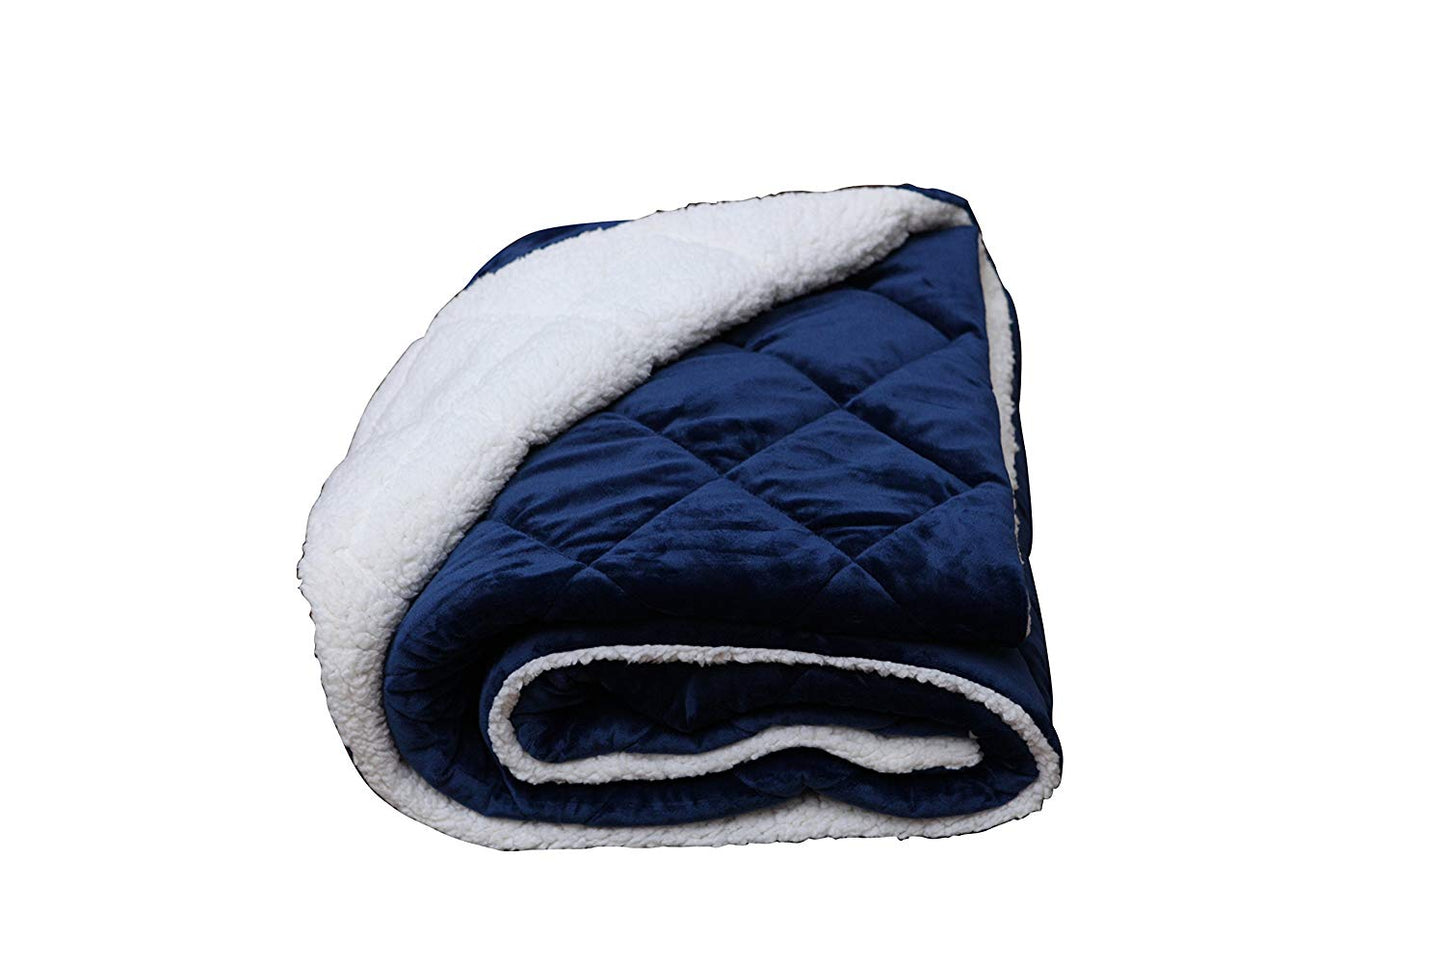 Navy Blue Microfiber Solid Color Plush Throw